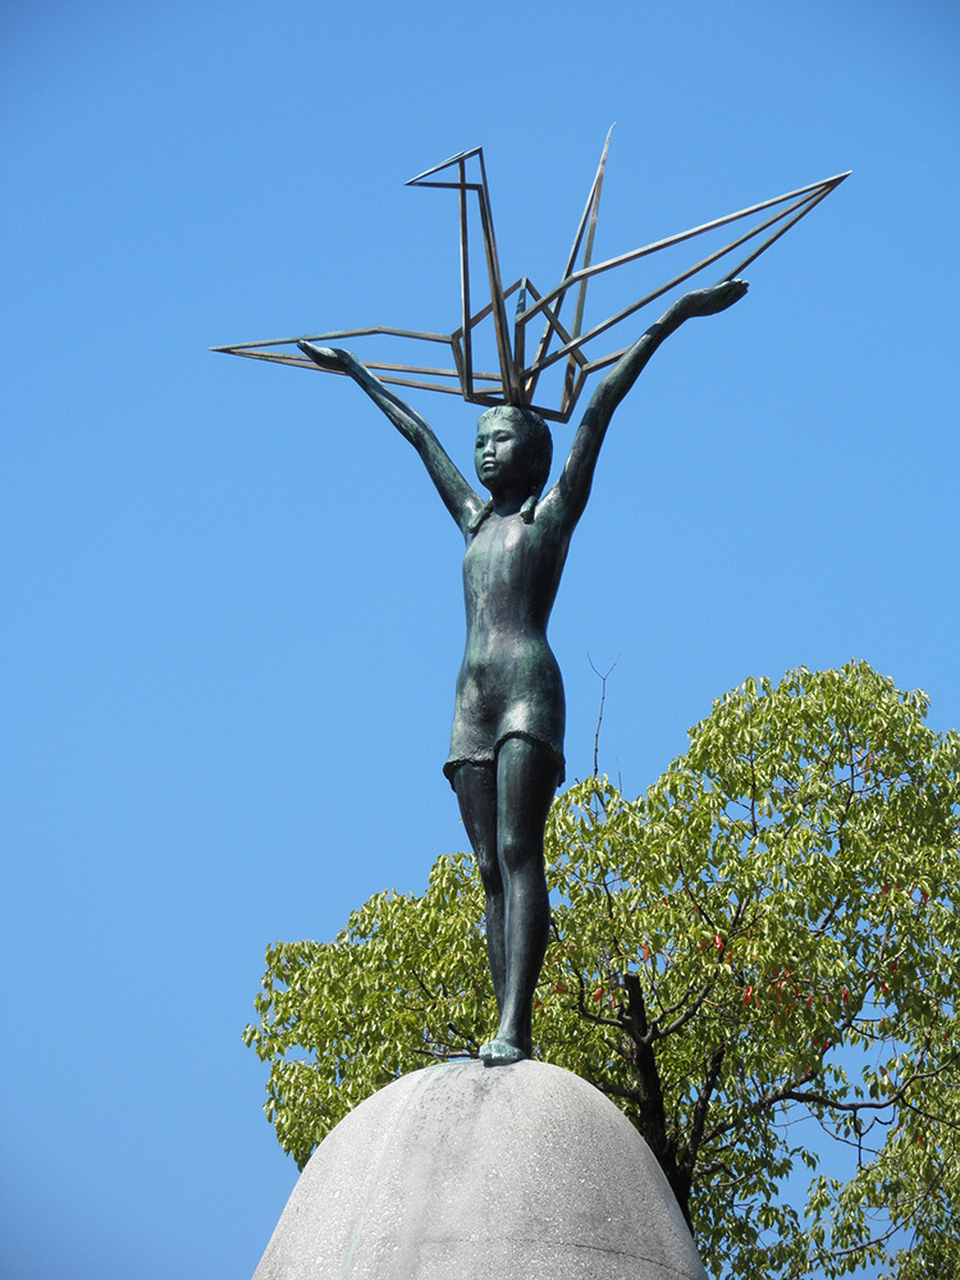 The Children’s Peace Monument in the Hiroshima Peace Memorial Park depicts a young girl modeled after Sadako holding a crane up to the sky in her outstretched arms. SPOTTY/PHOTO LIBRARY